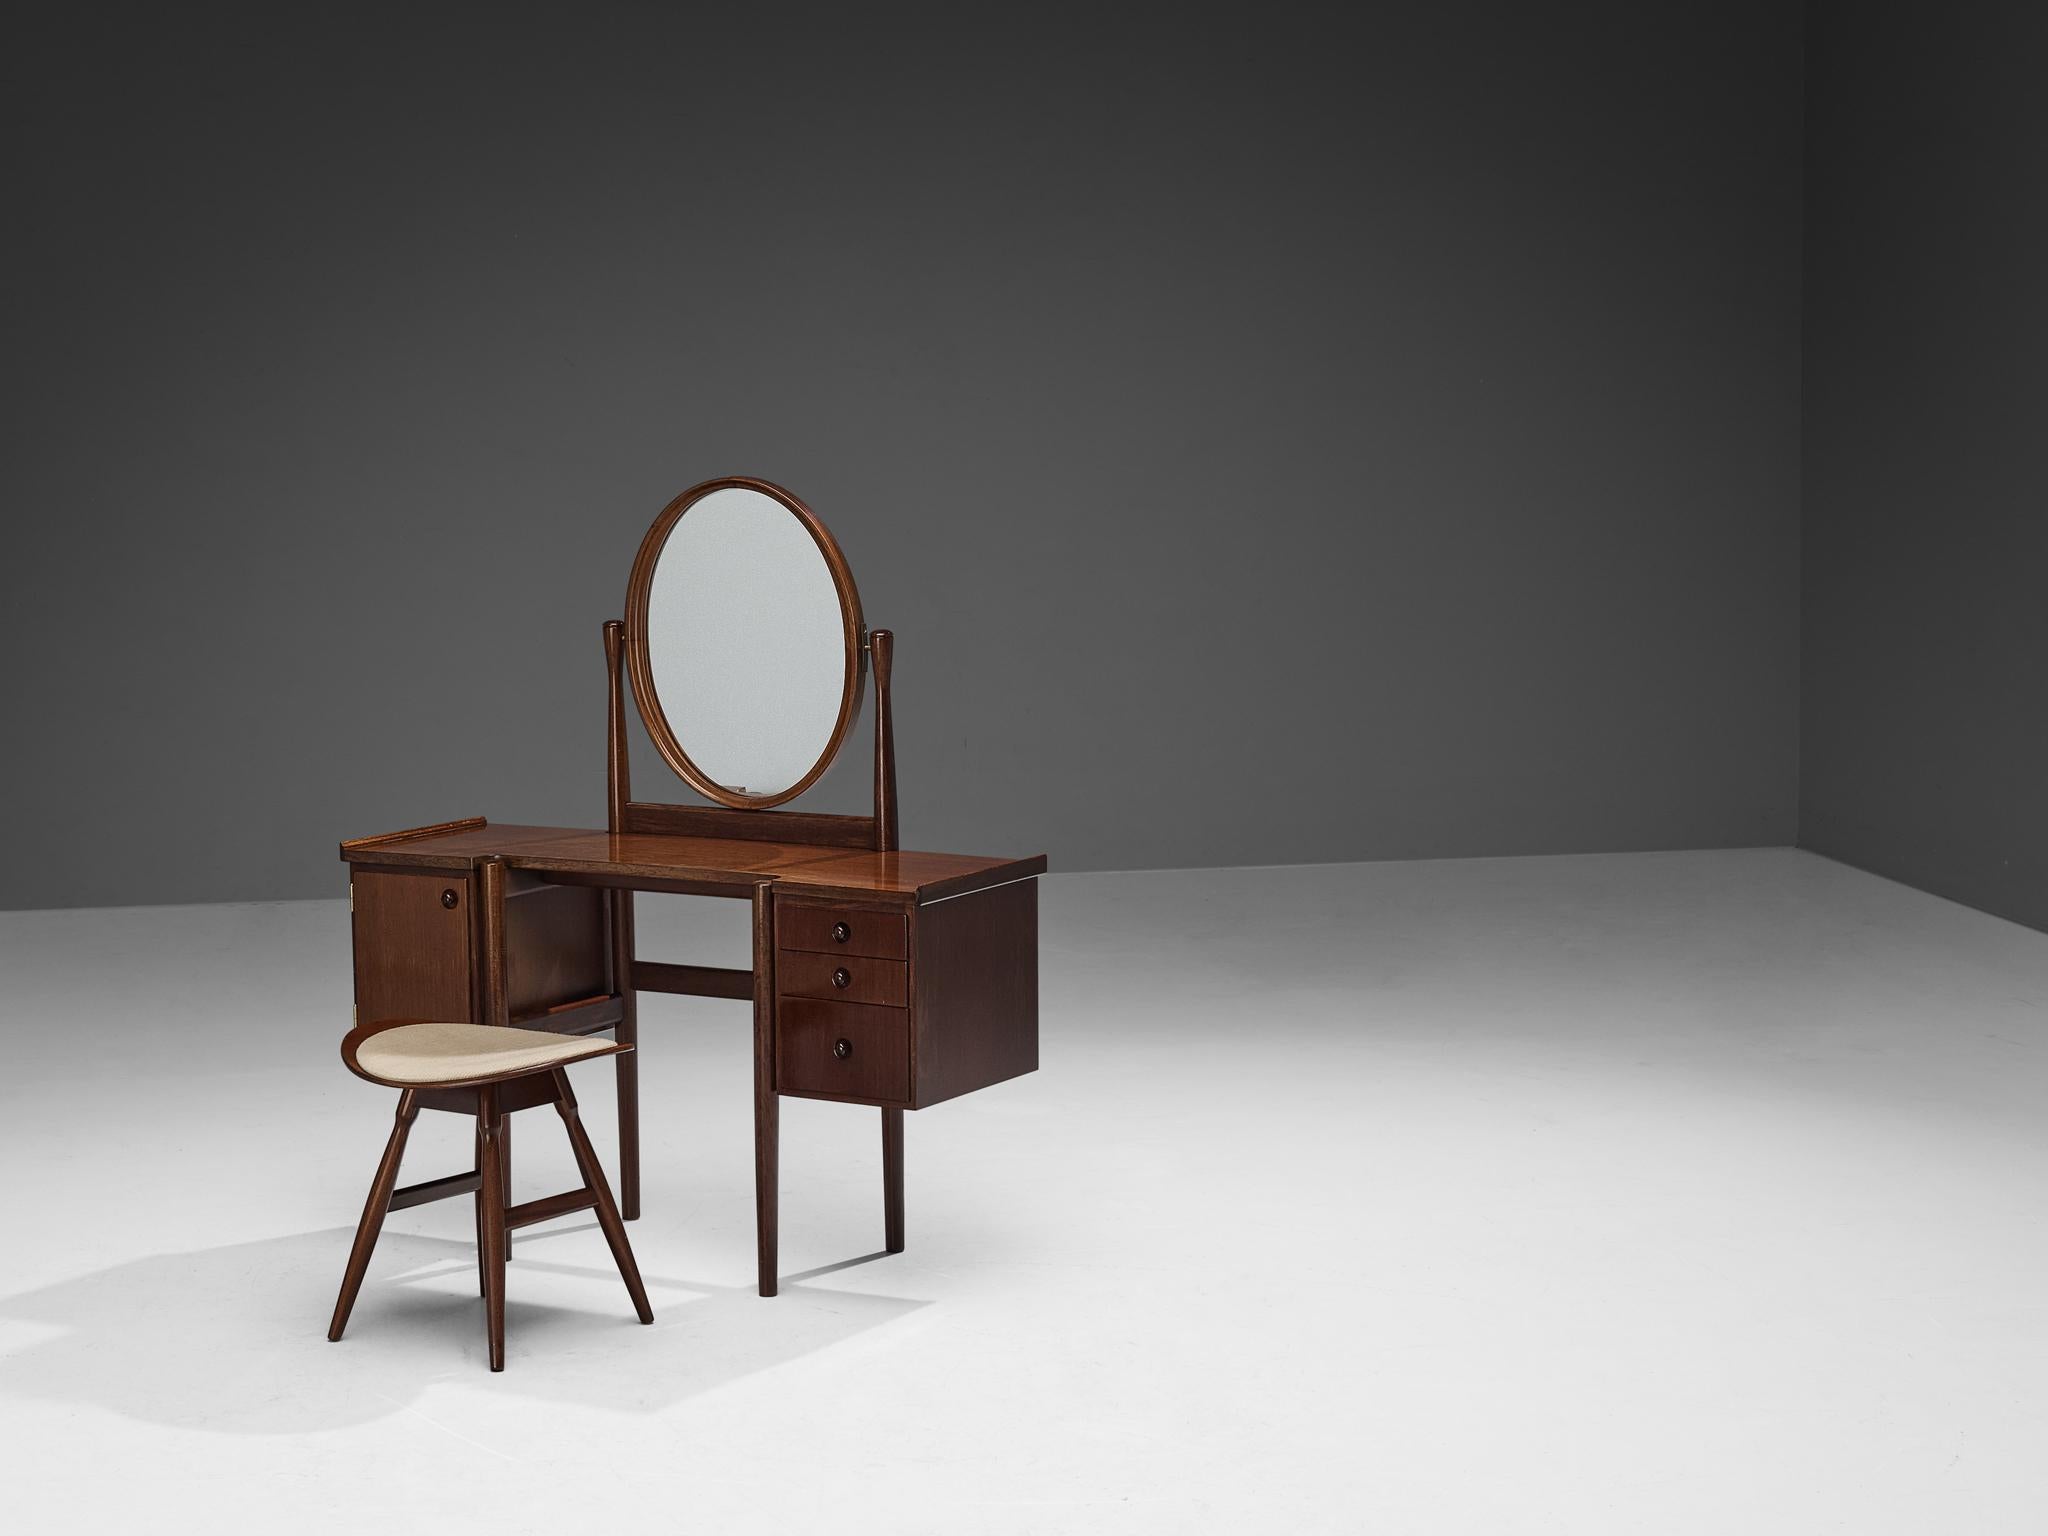 Olof Ottelin for OY Stockmann AB, Kervo Snickerifabrik, dressing table with stool, Finland, 1960s 

This elegant vanity table with stool combines simplicity with style in a superb manner. Executed in teak, this well-proportioned piece embodies a